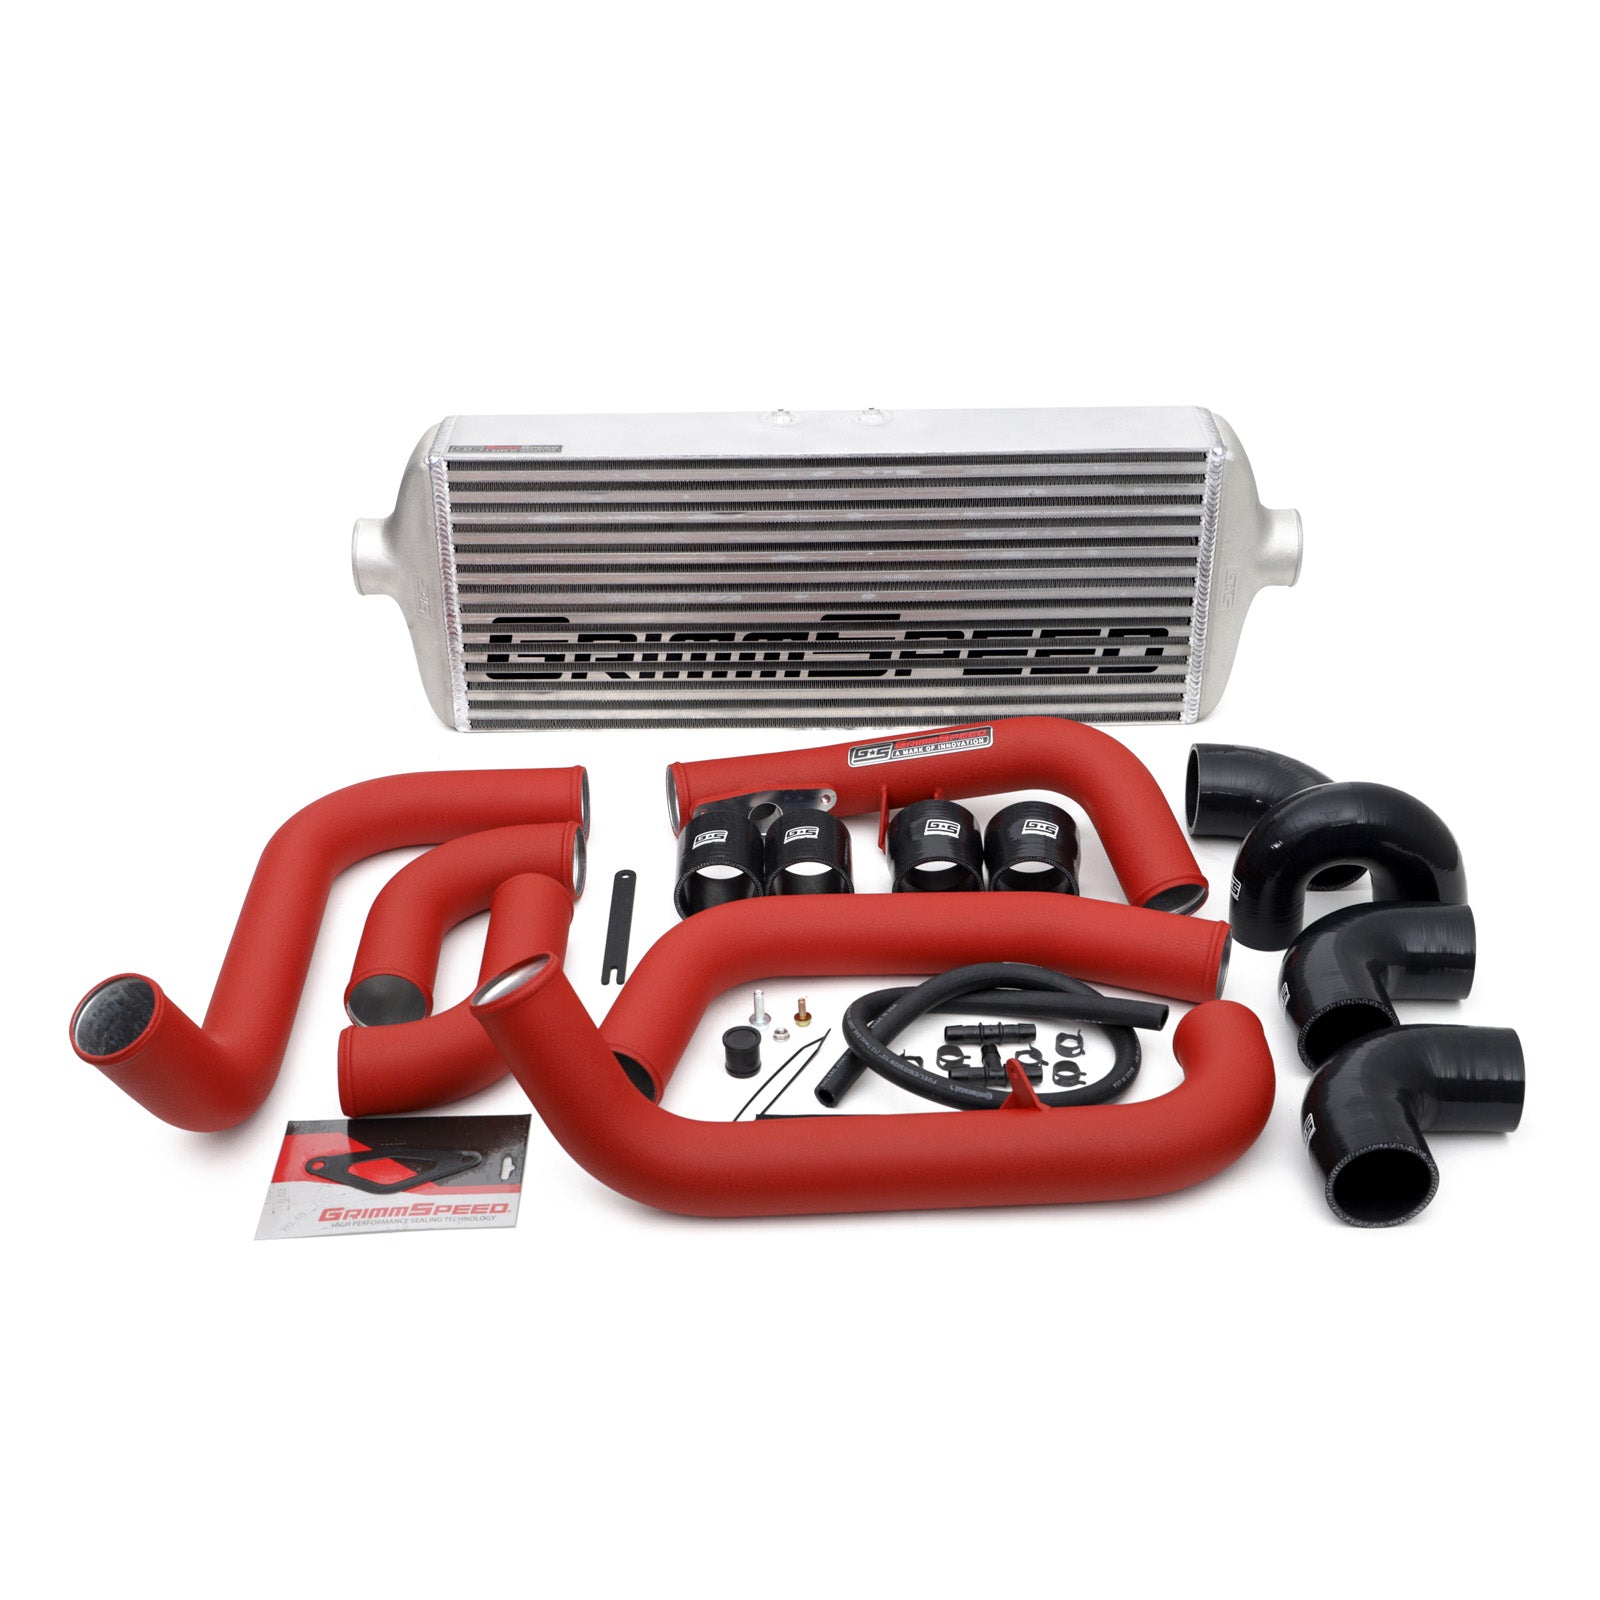 GrimmSpeed Front Mount Intercooler Kit - Raw Core with Red Piping - 2008-14 Subaru STI